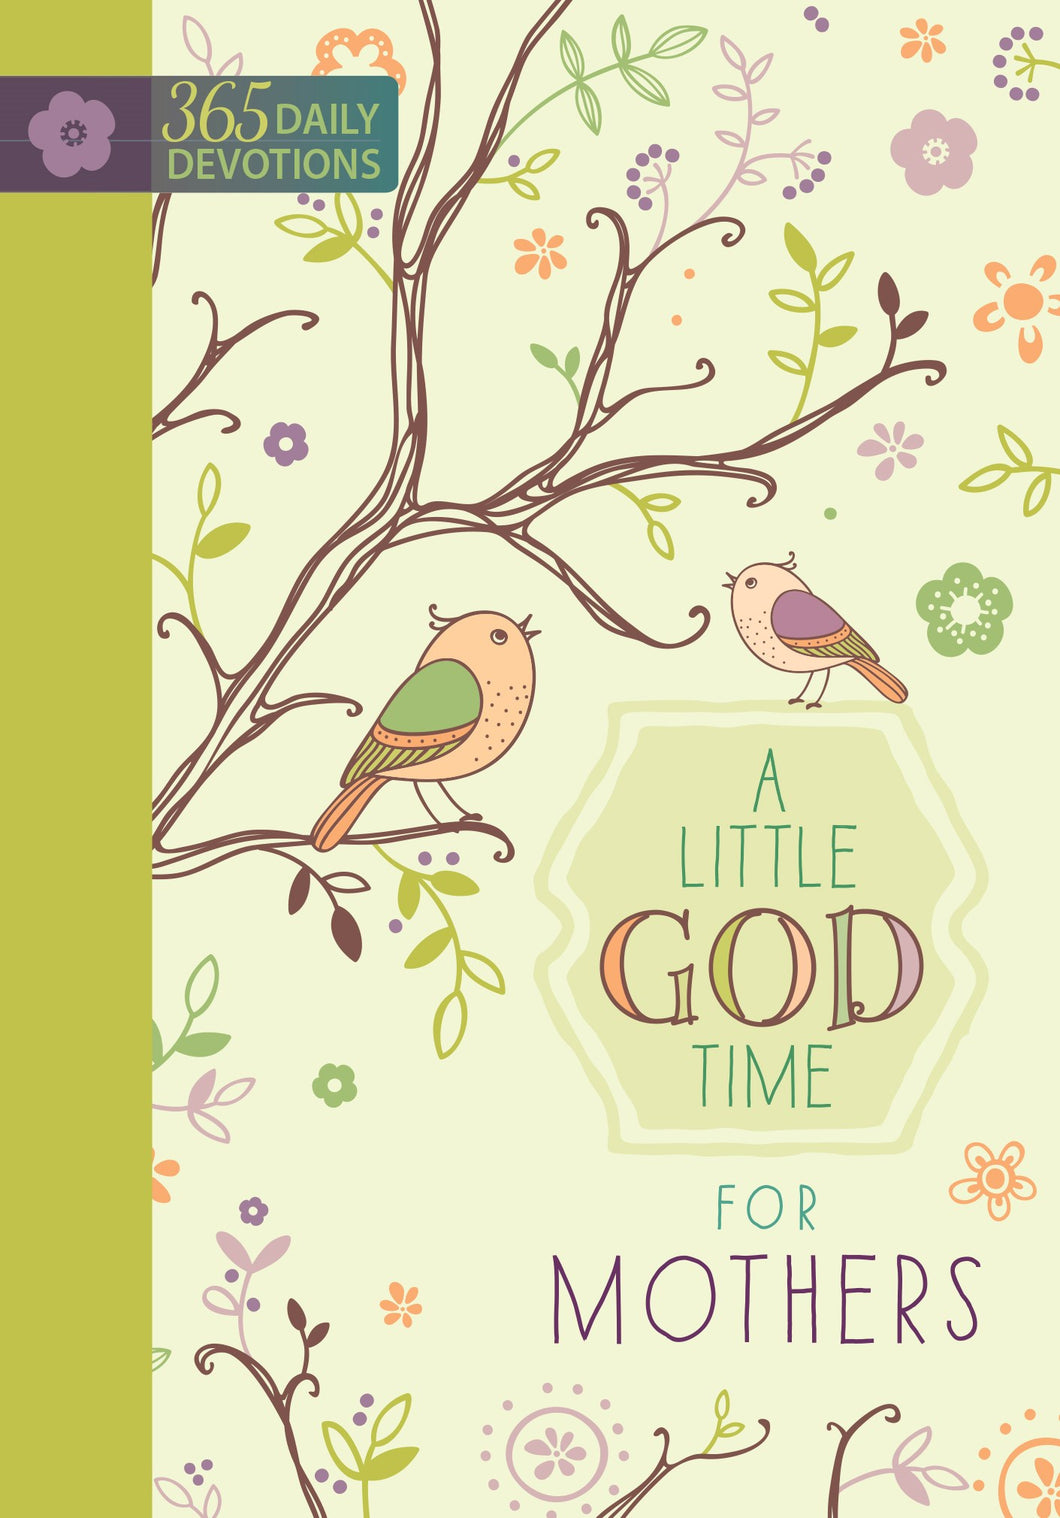 Little God Time For Mothers (365 Day Devotional)